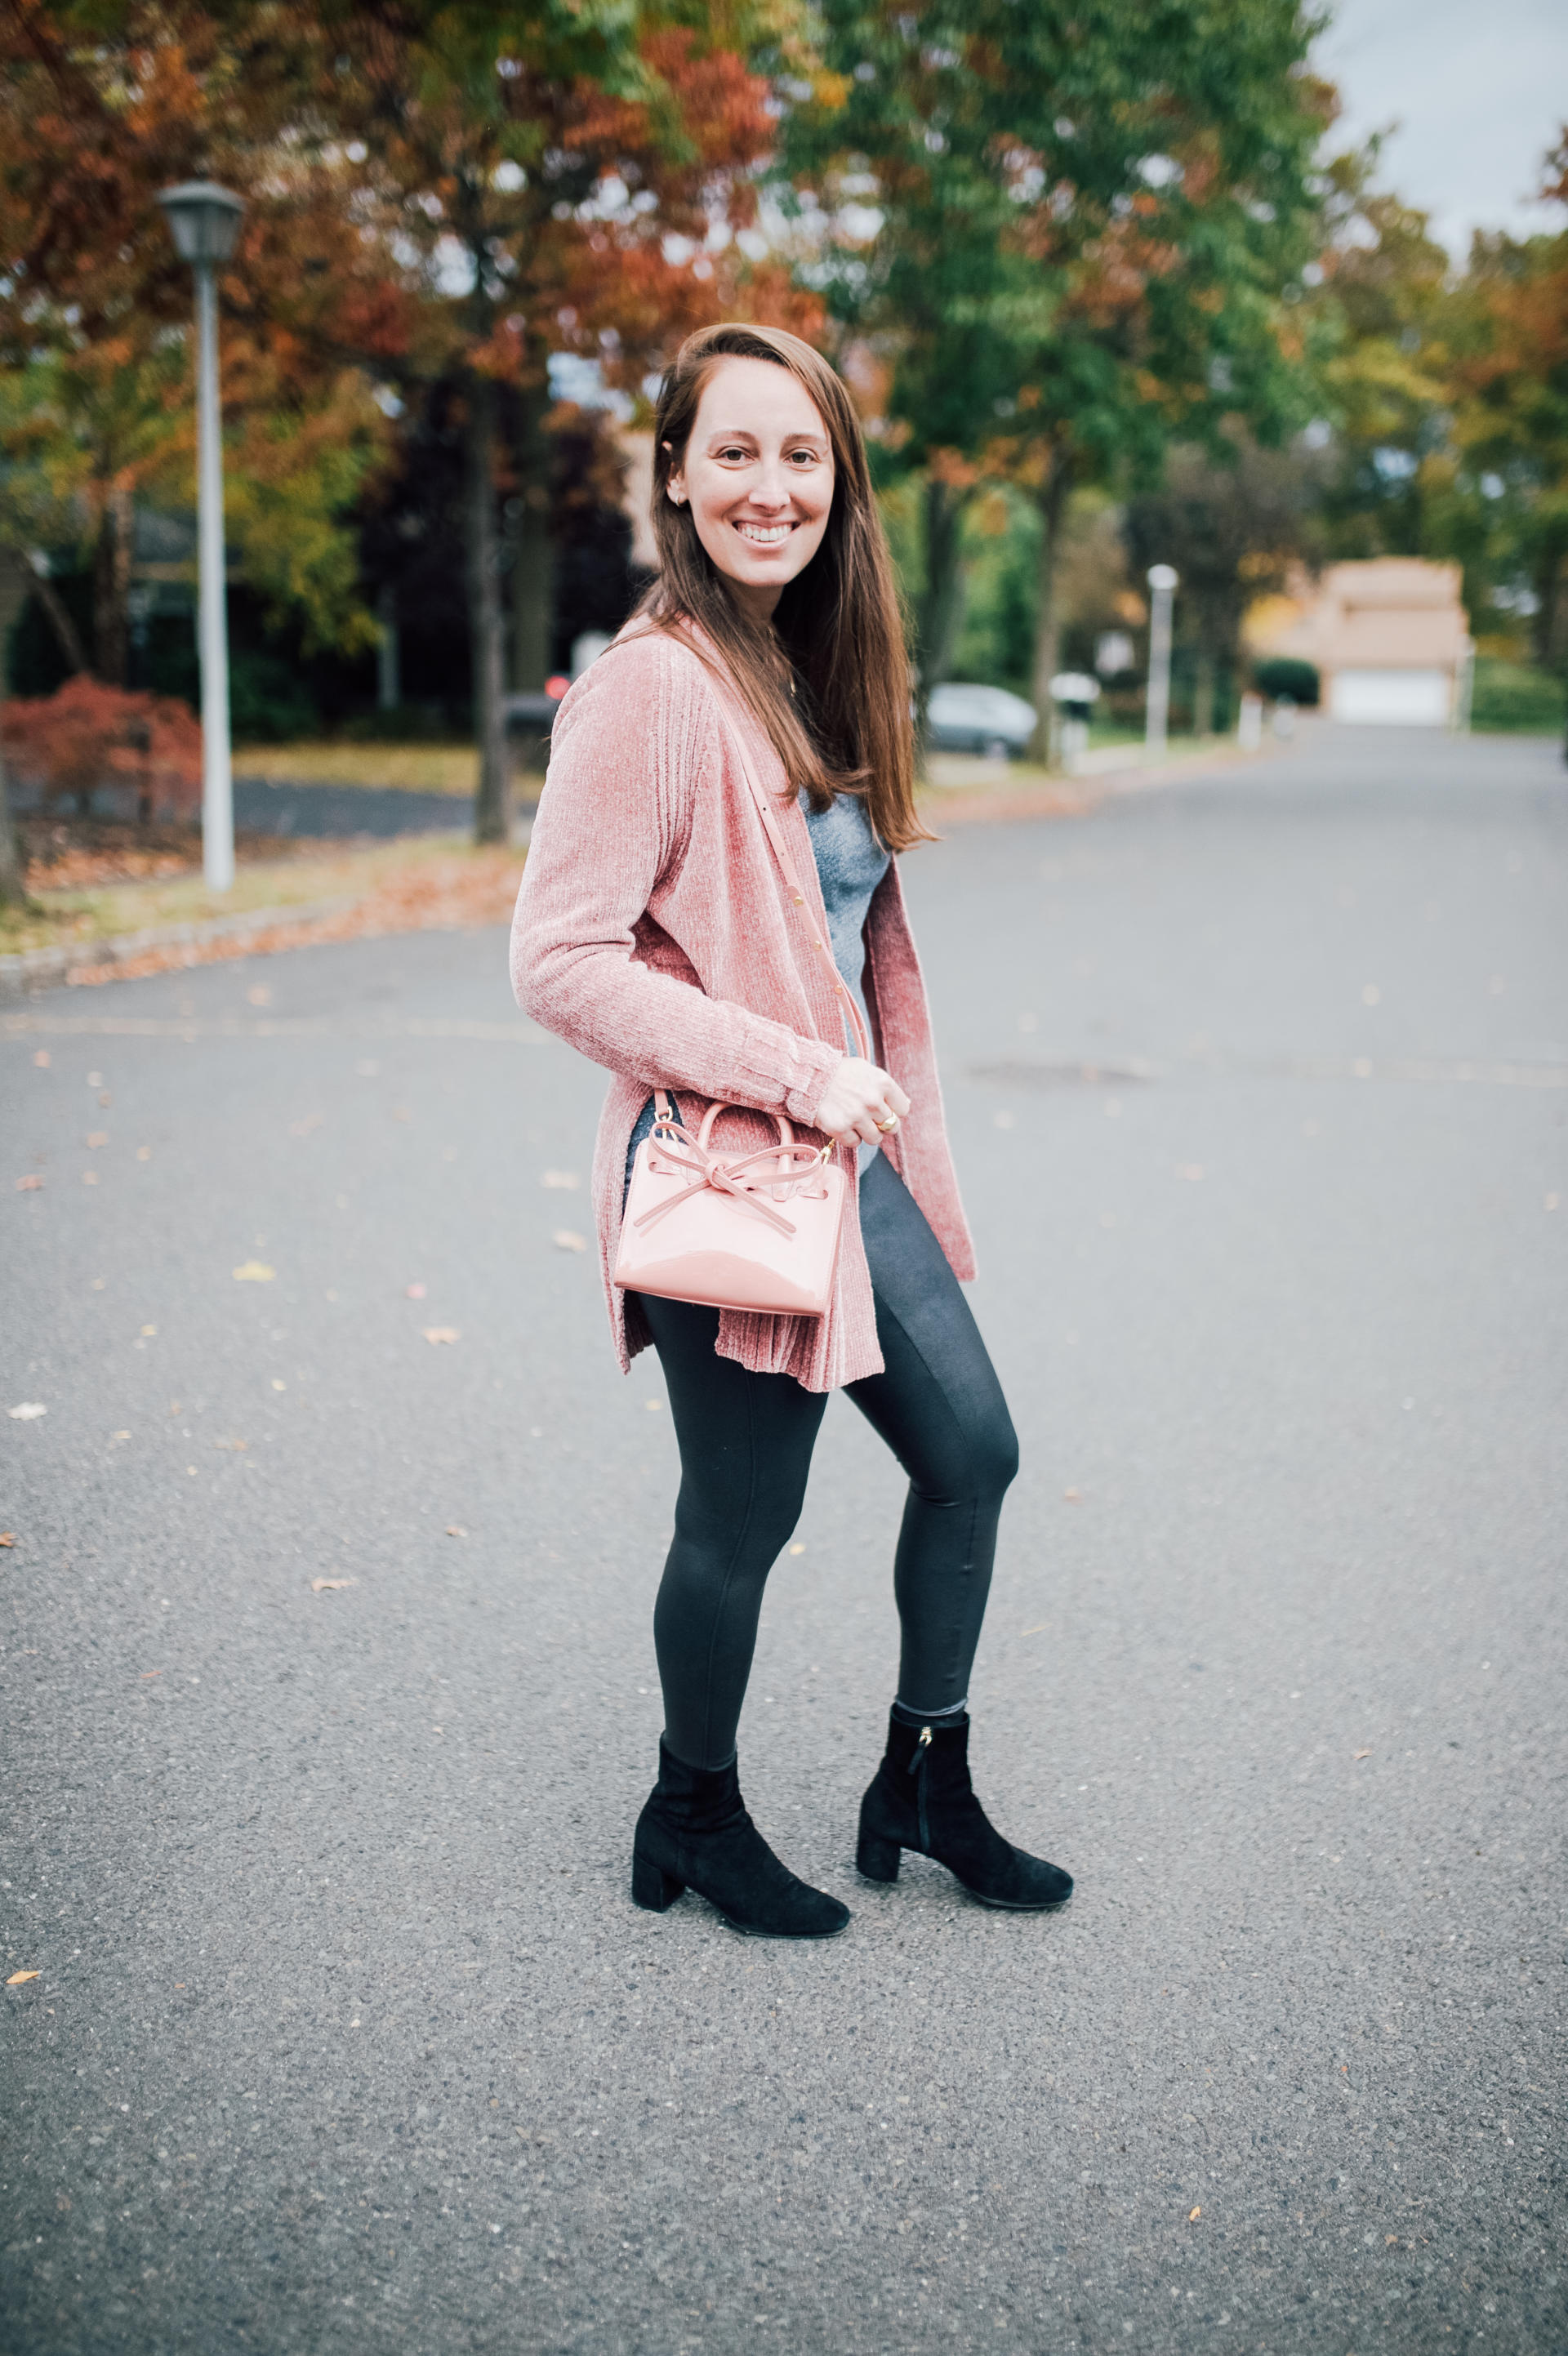 Spanx Black Leggings Are Girl's Best Friend by New Jersey style blogger What's For Dinner Esq.